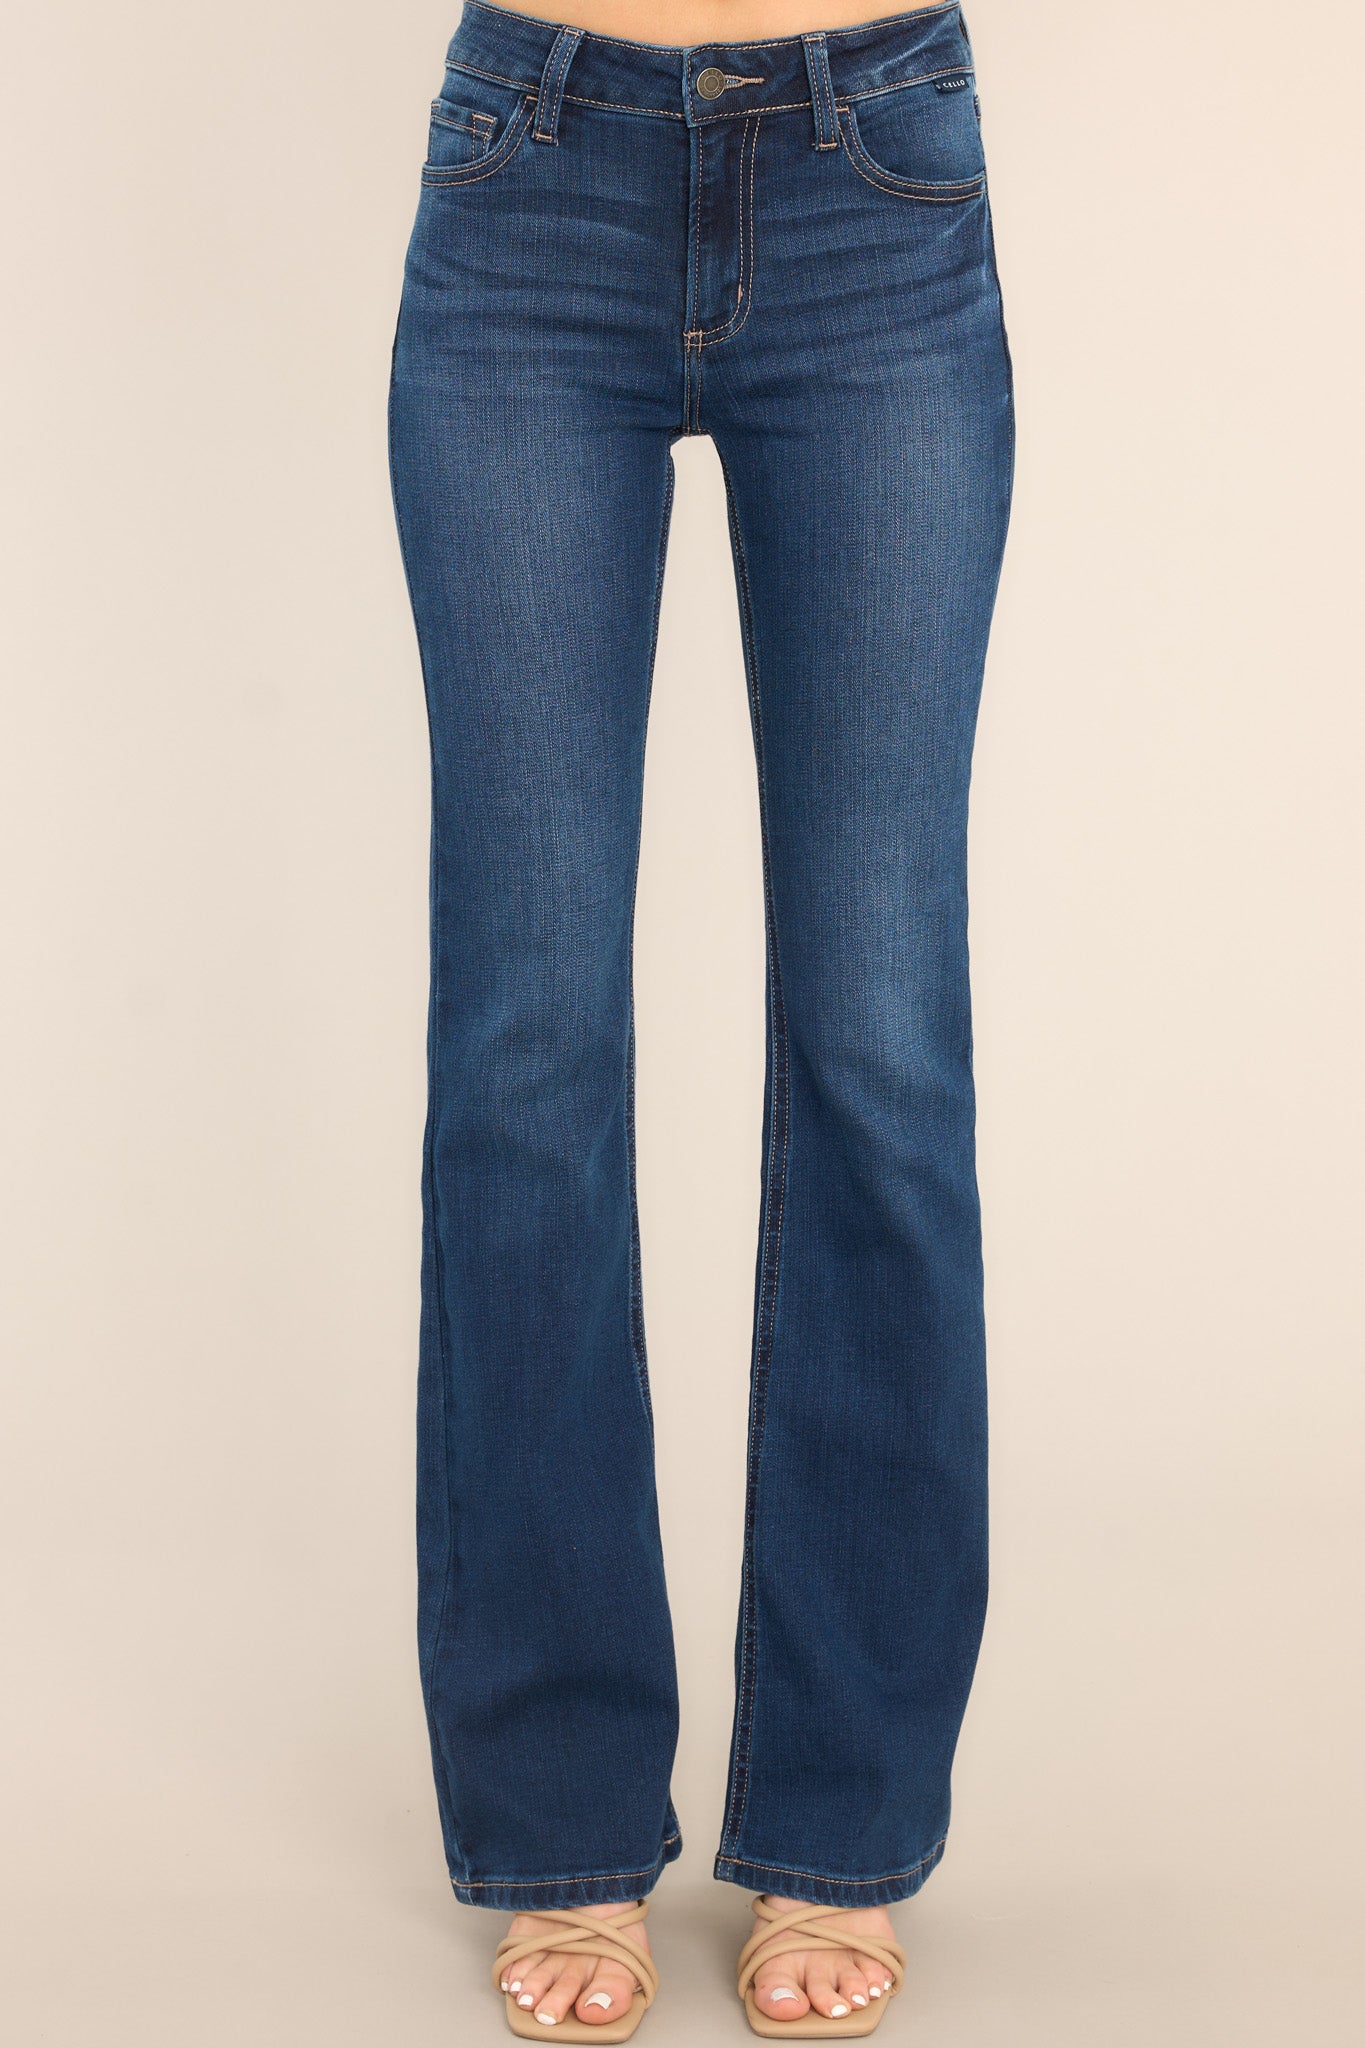 Front view of these jeans that feature a classic button and zipper closure, belt loops, front and back pockets, a flared cut, and a dark wash.